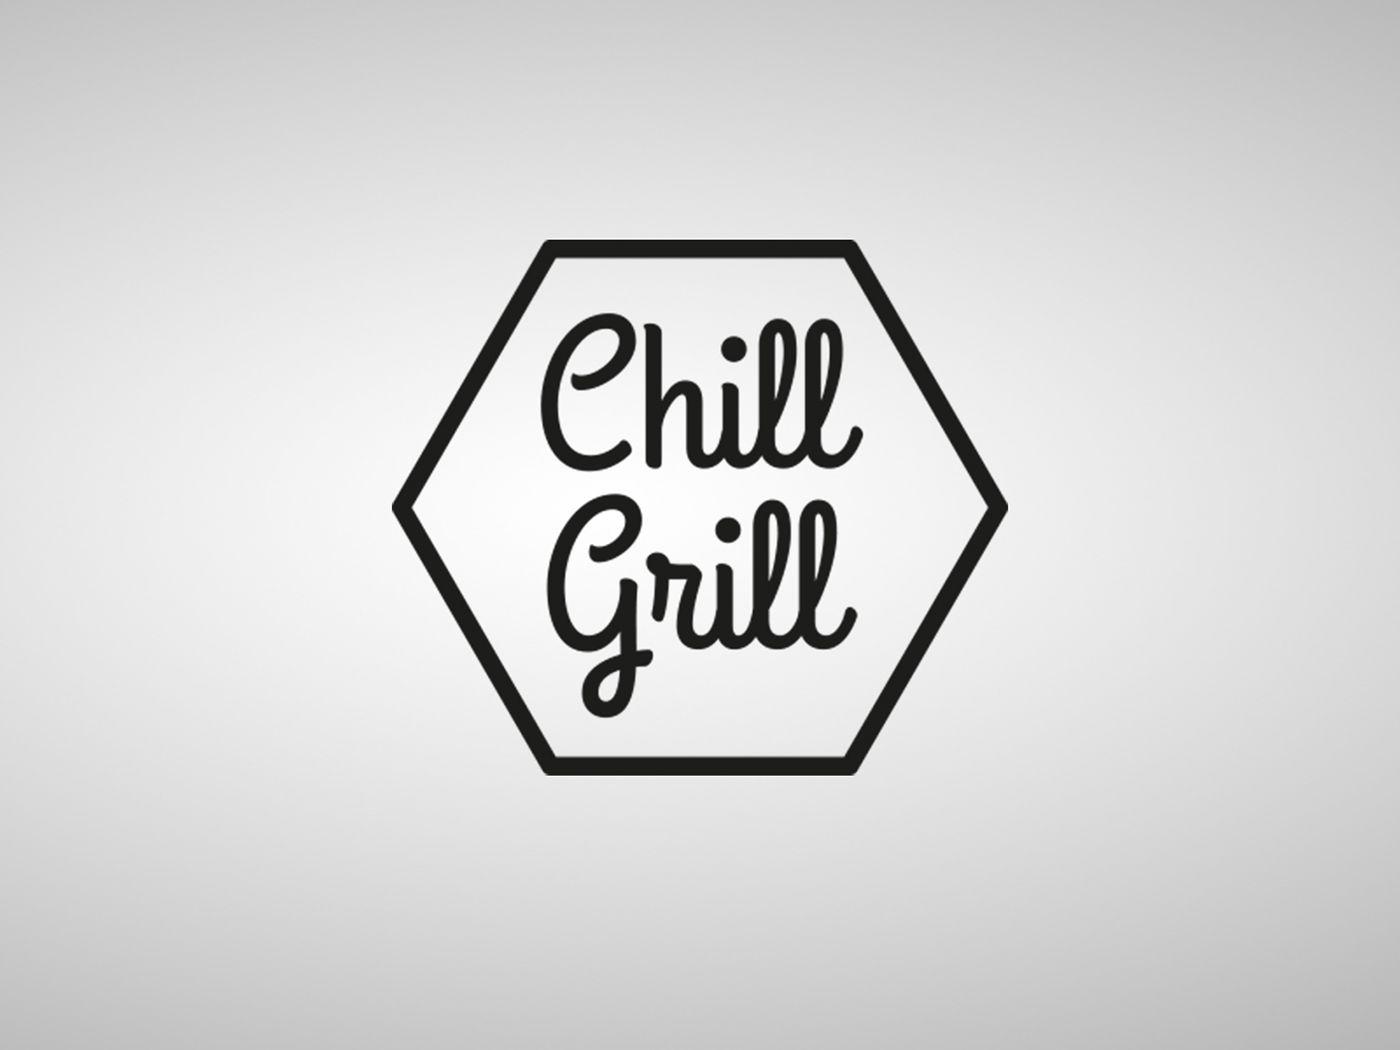 Chill and Grill Logo - Chill Grill - logo & prints on Behance